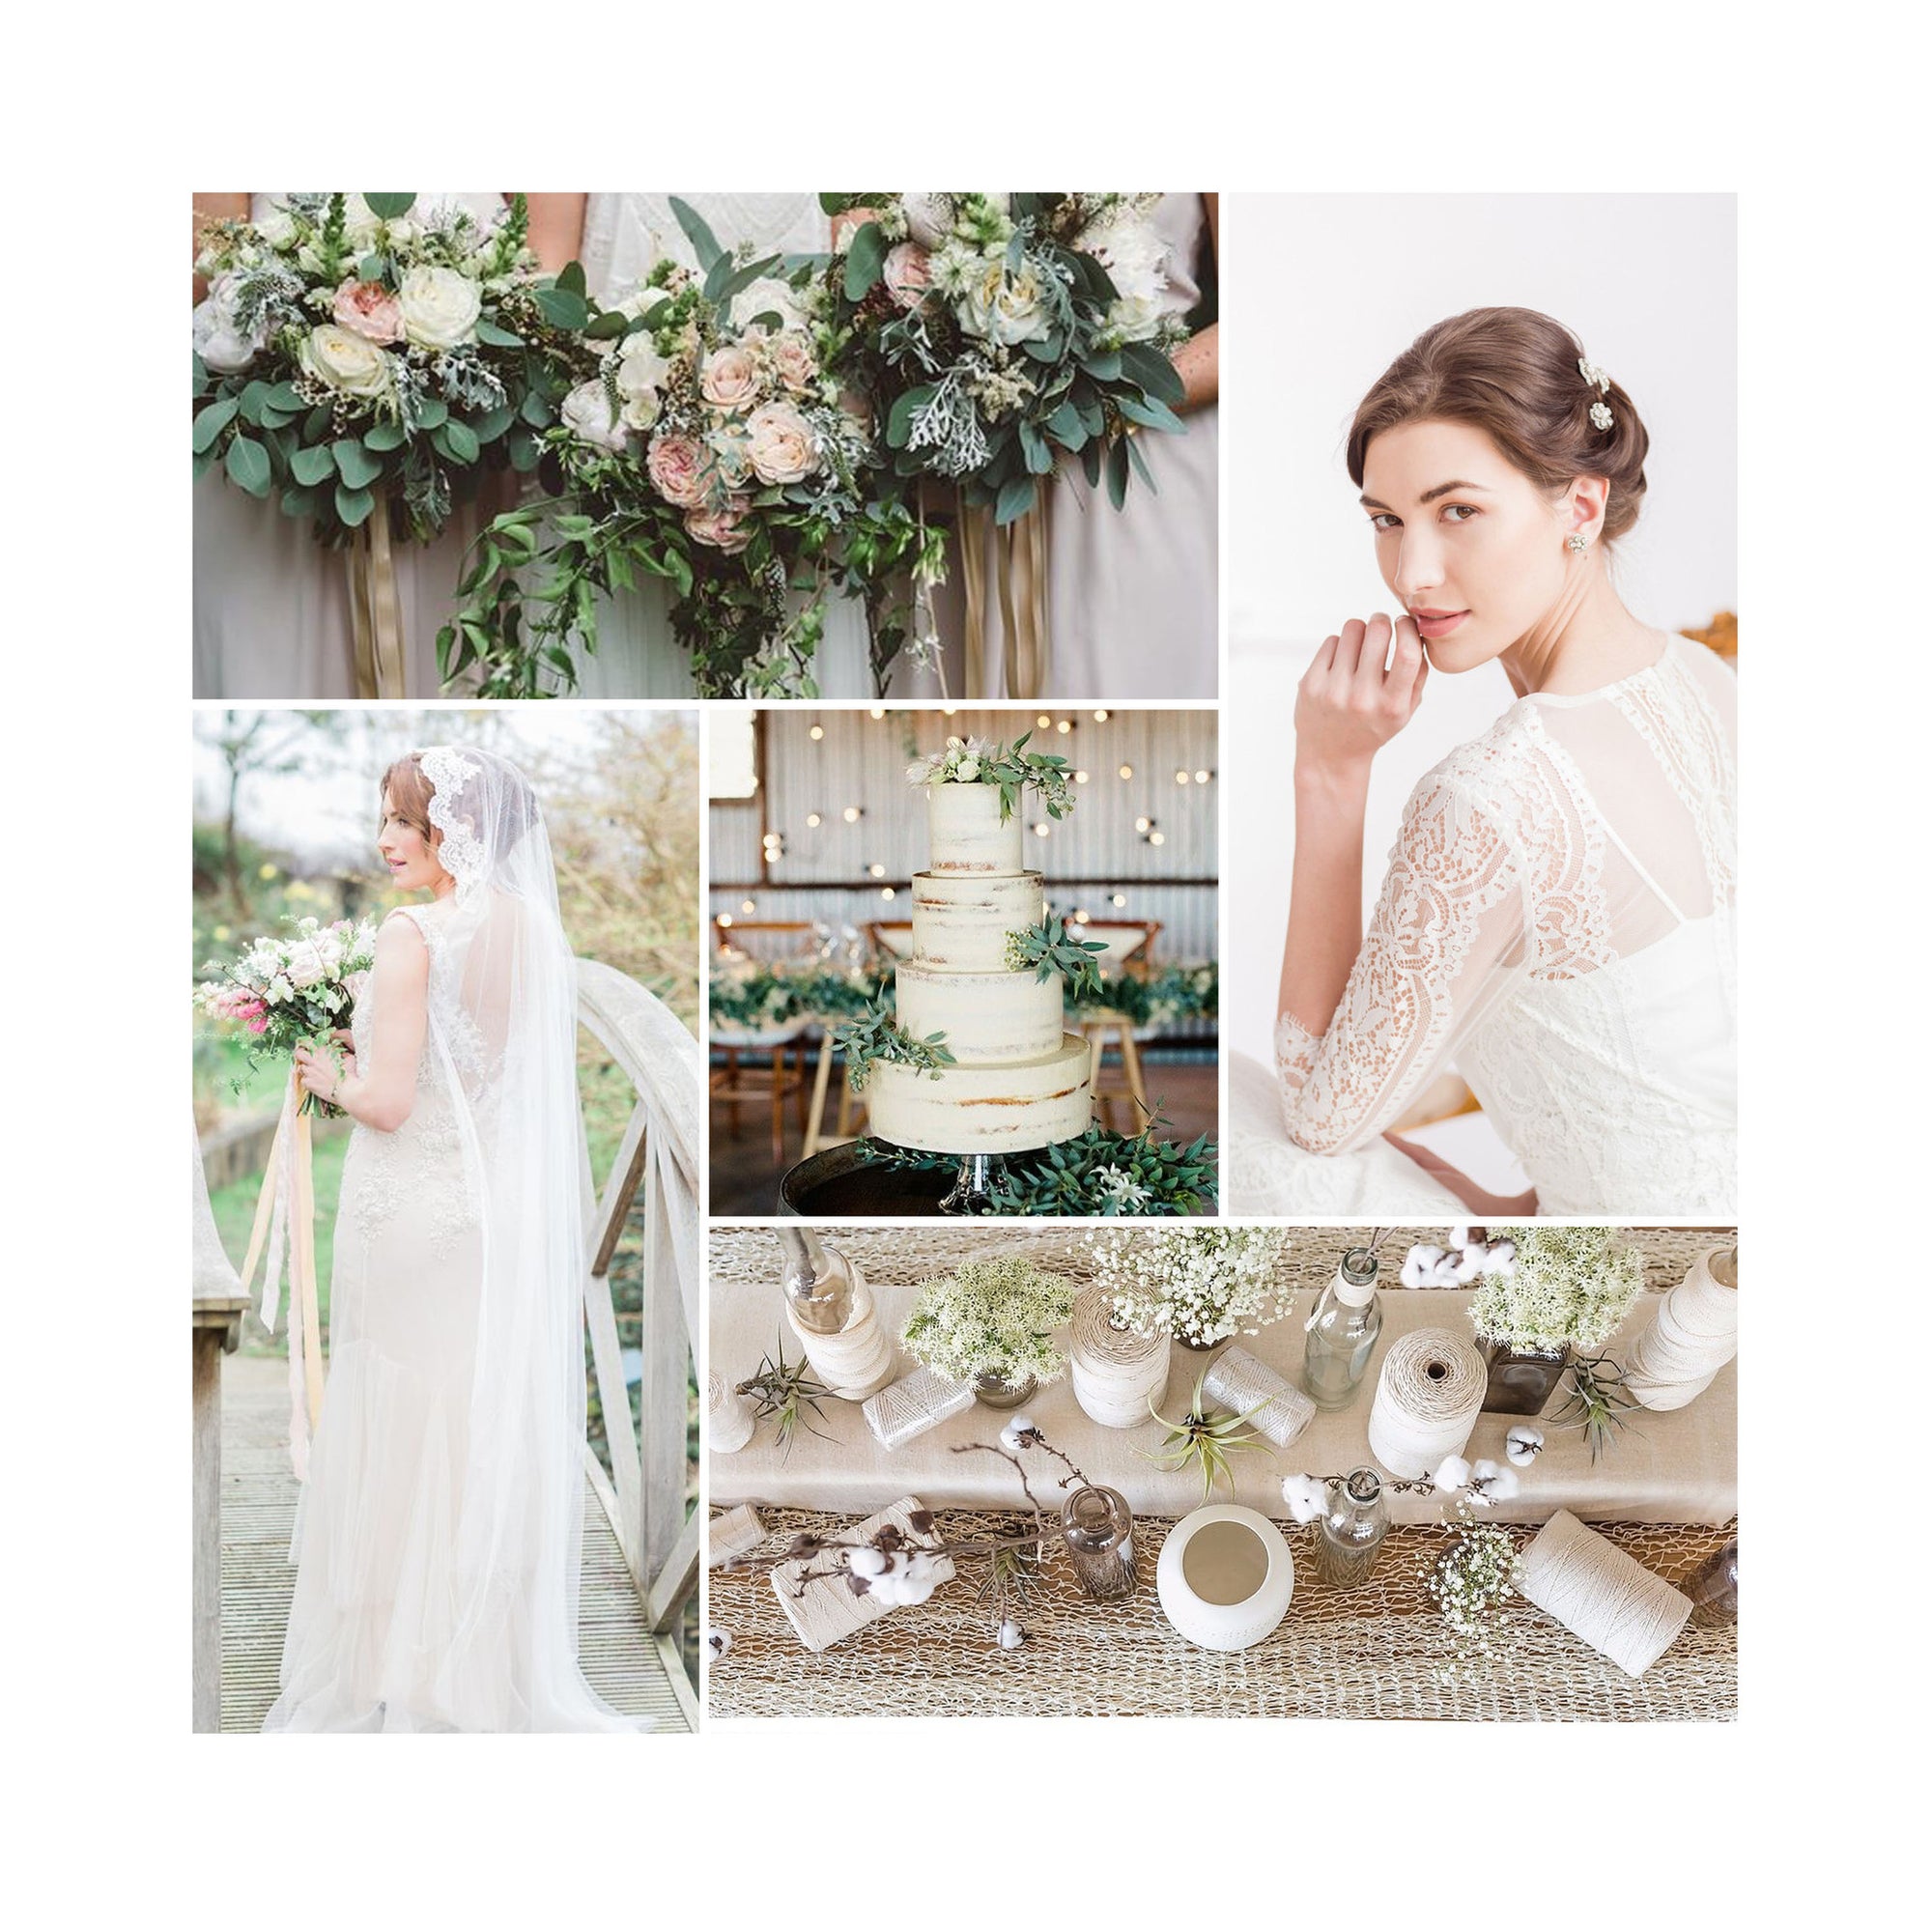 Ivory and pale green wedding inspiration!